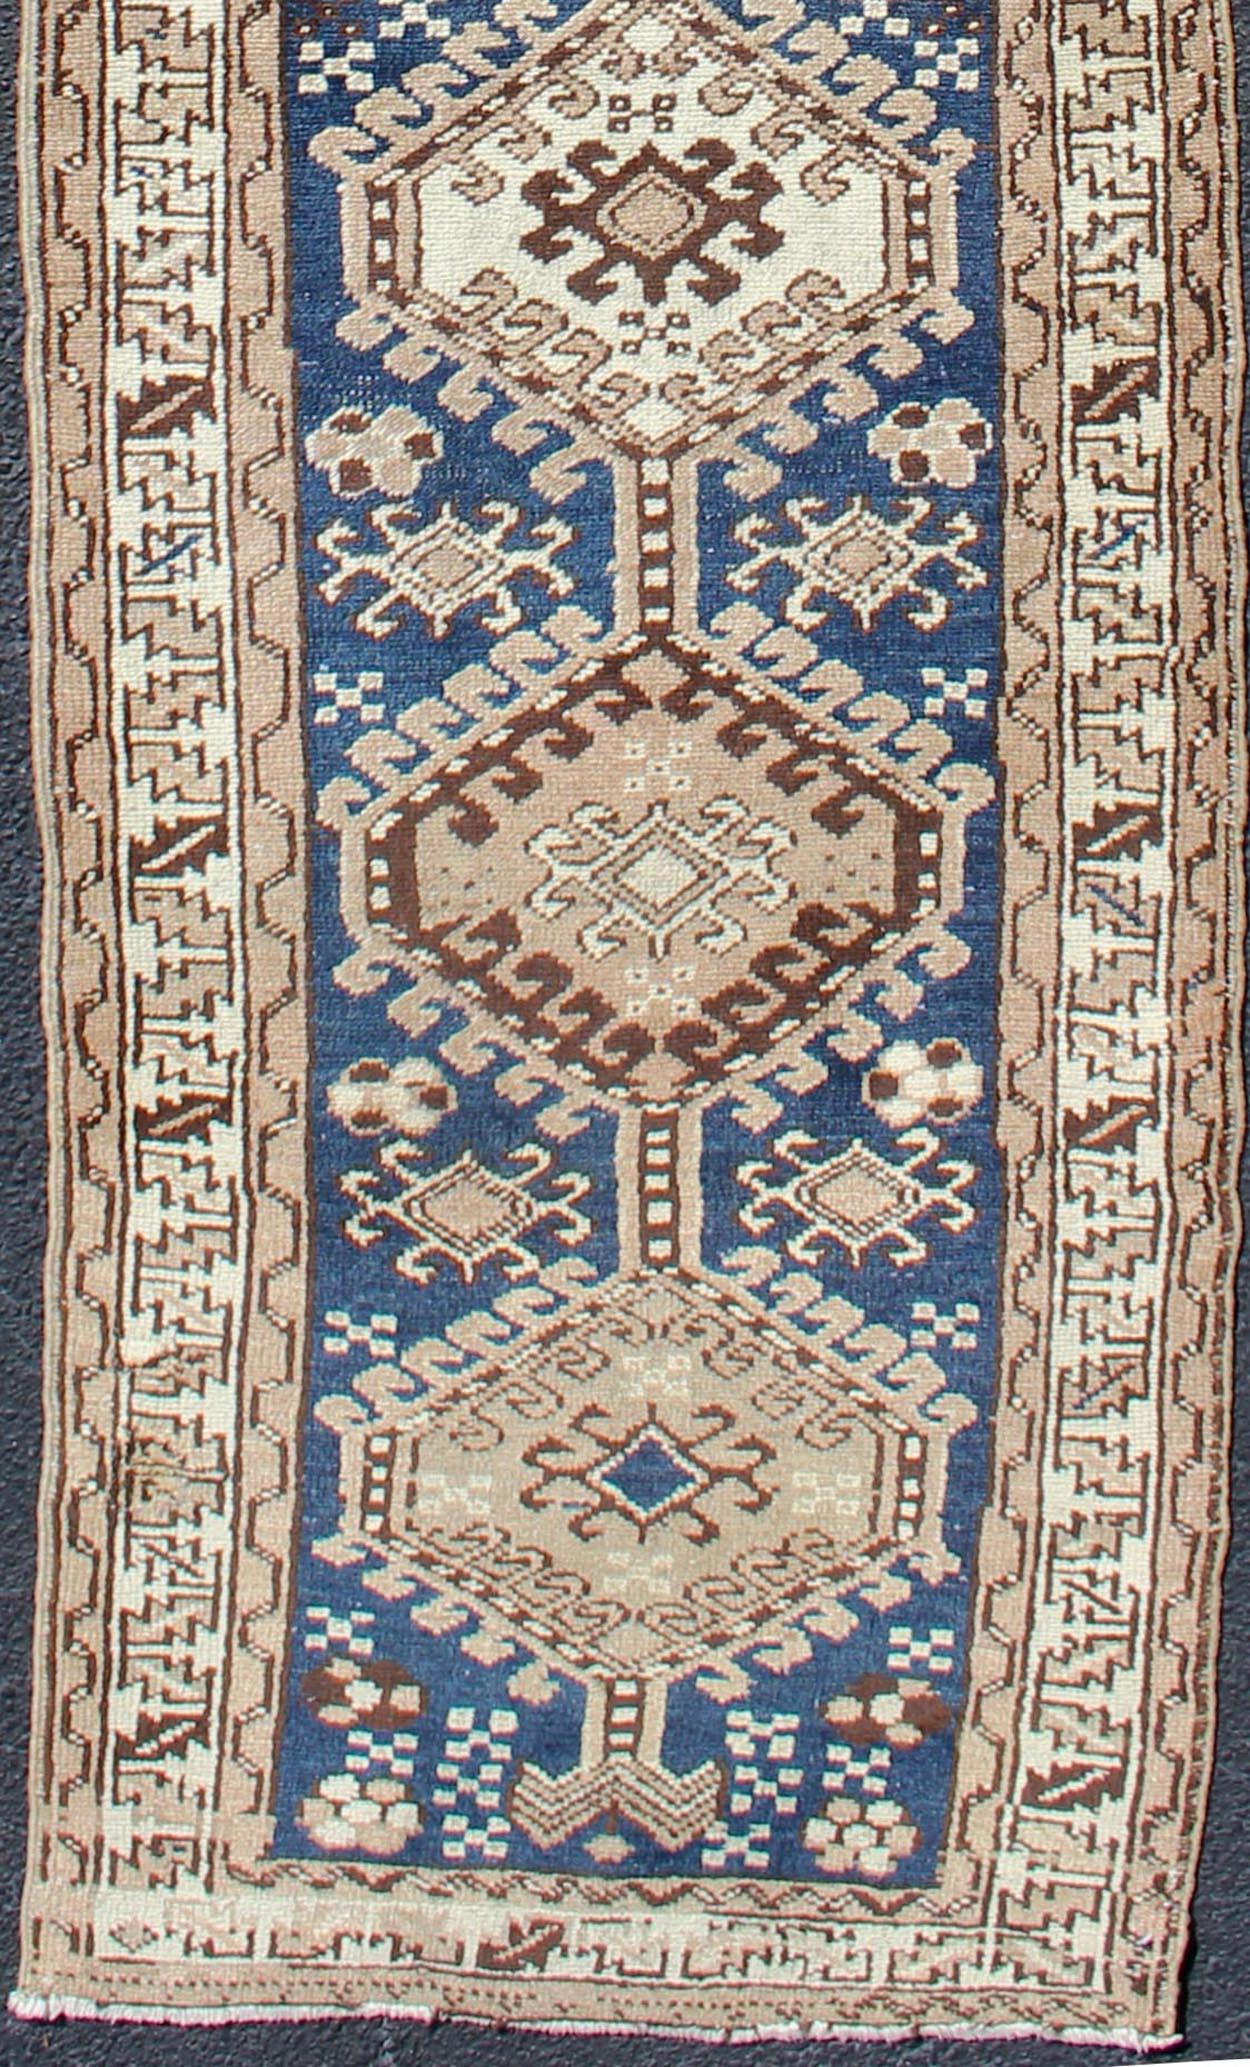 Heriz Serapi Antique Blue Tribal Karajeh Runner With Navy Blue, Brown and Earth Tones For Sale